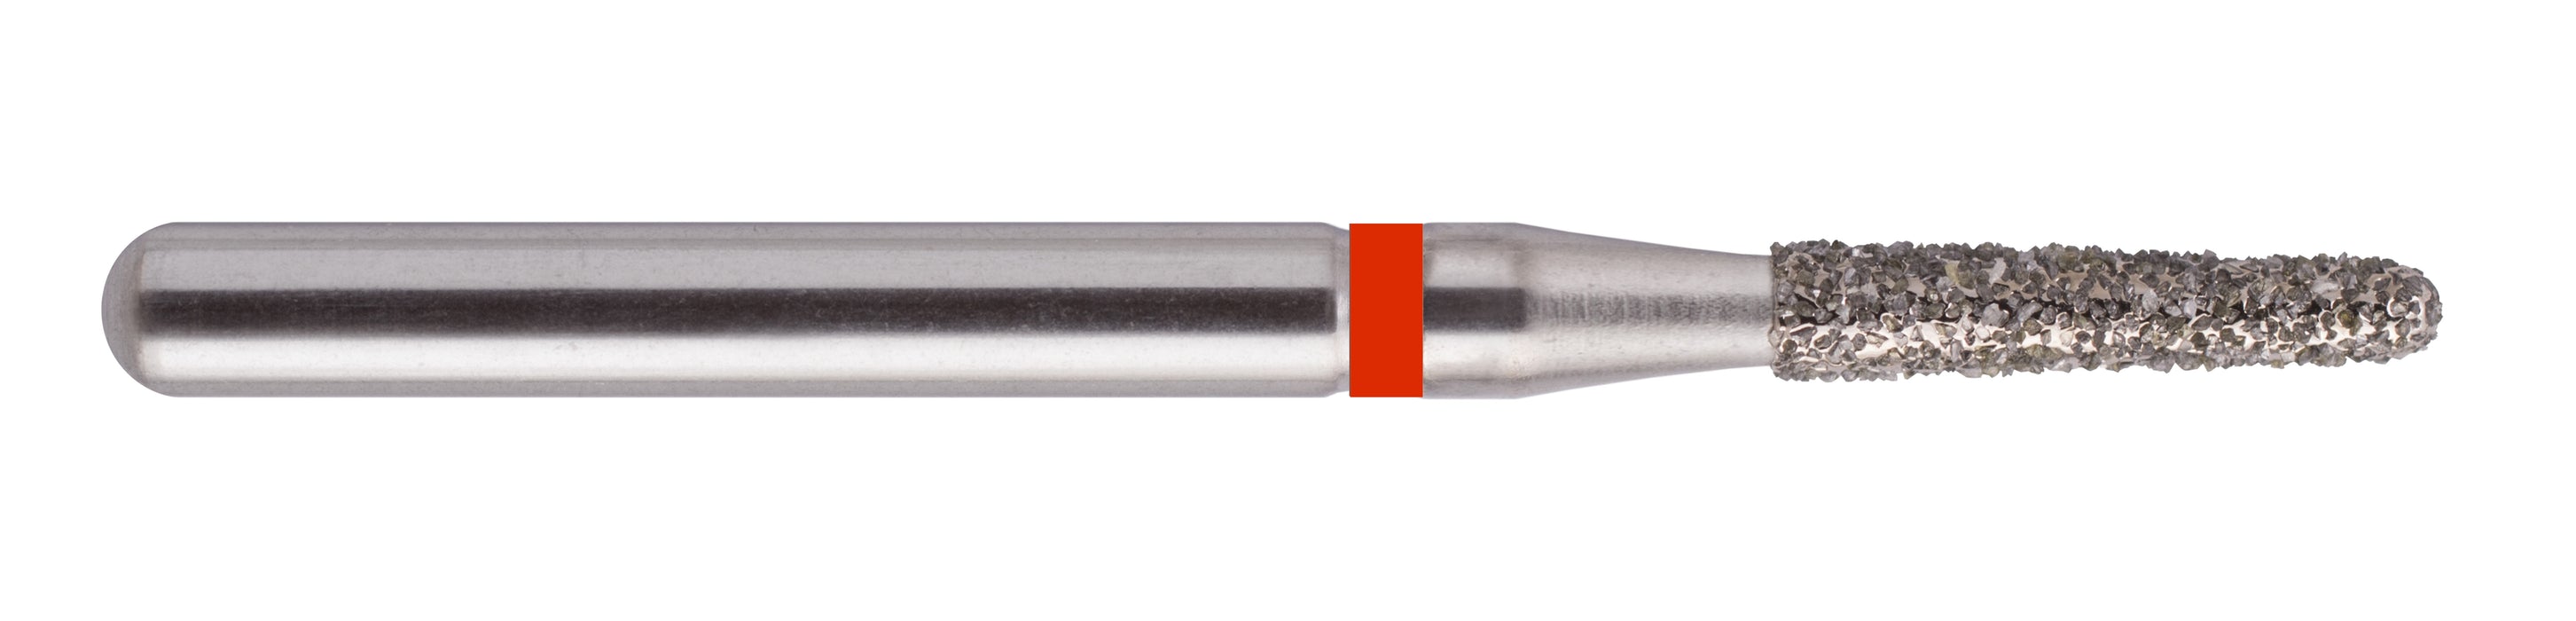 855 - Cone with rounded end